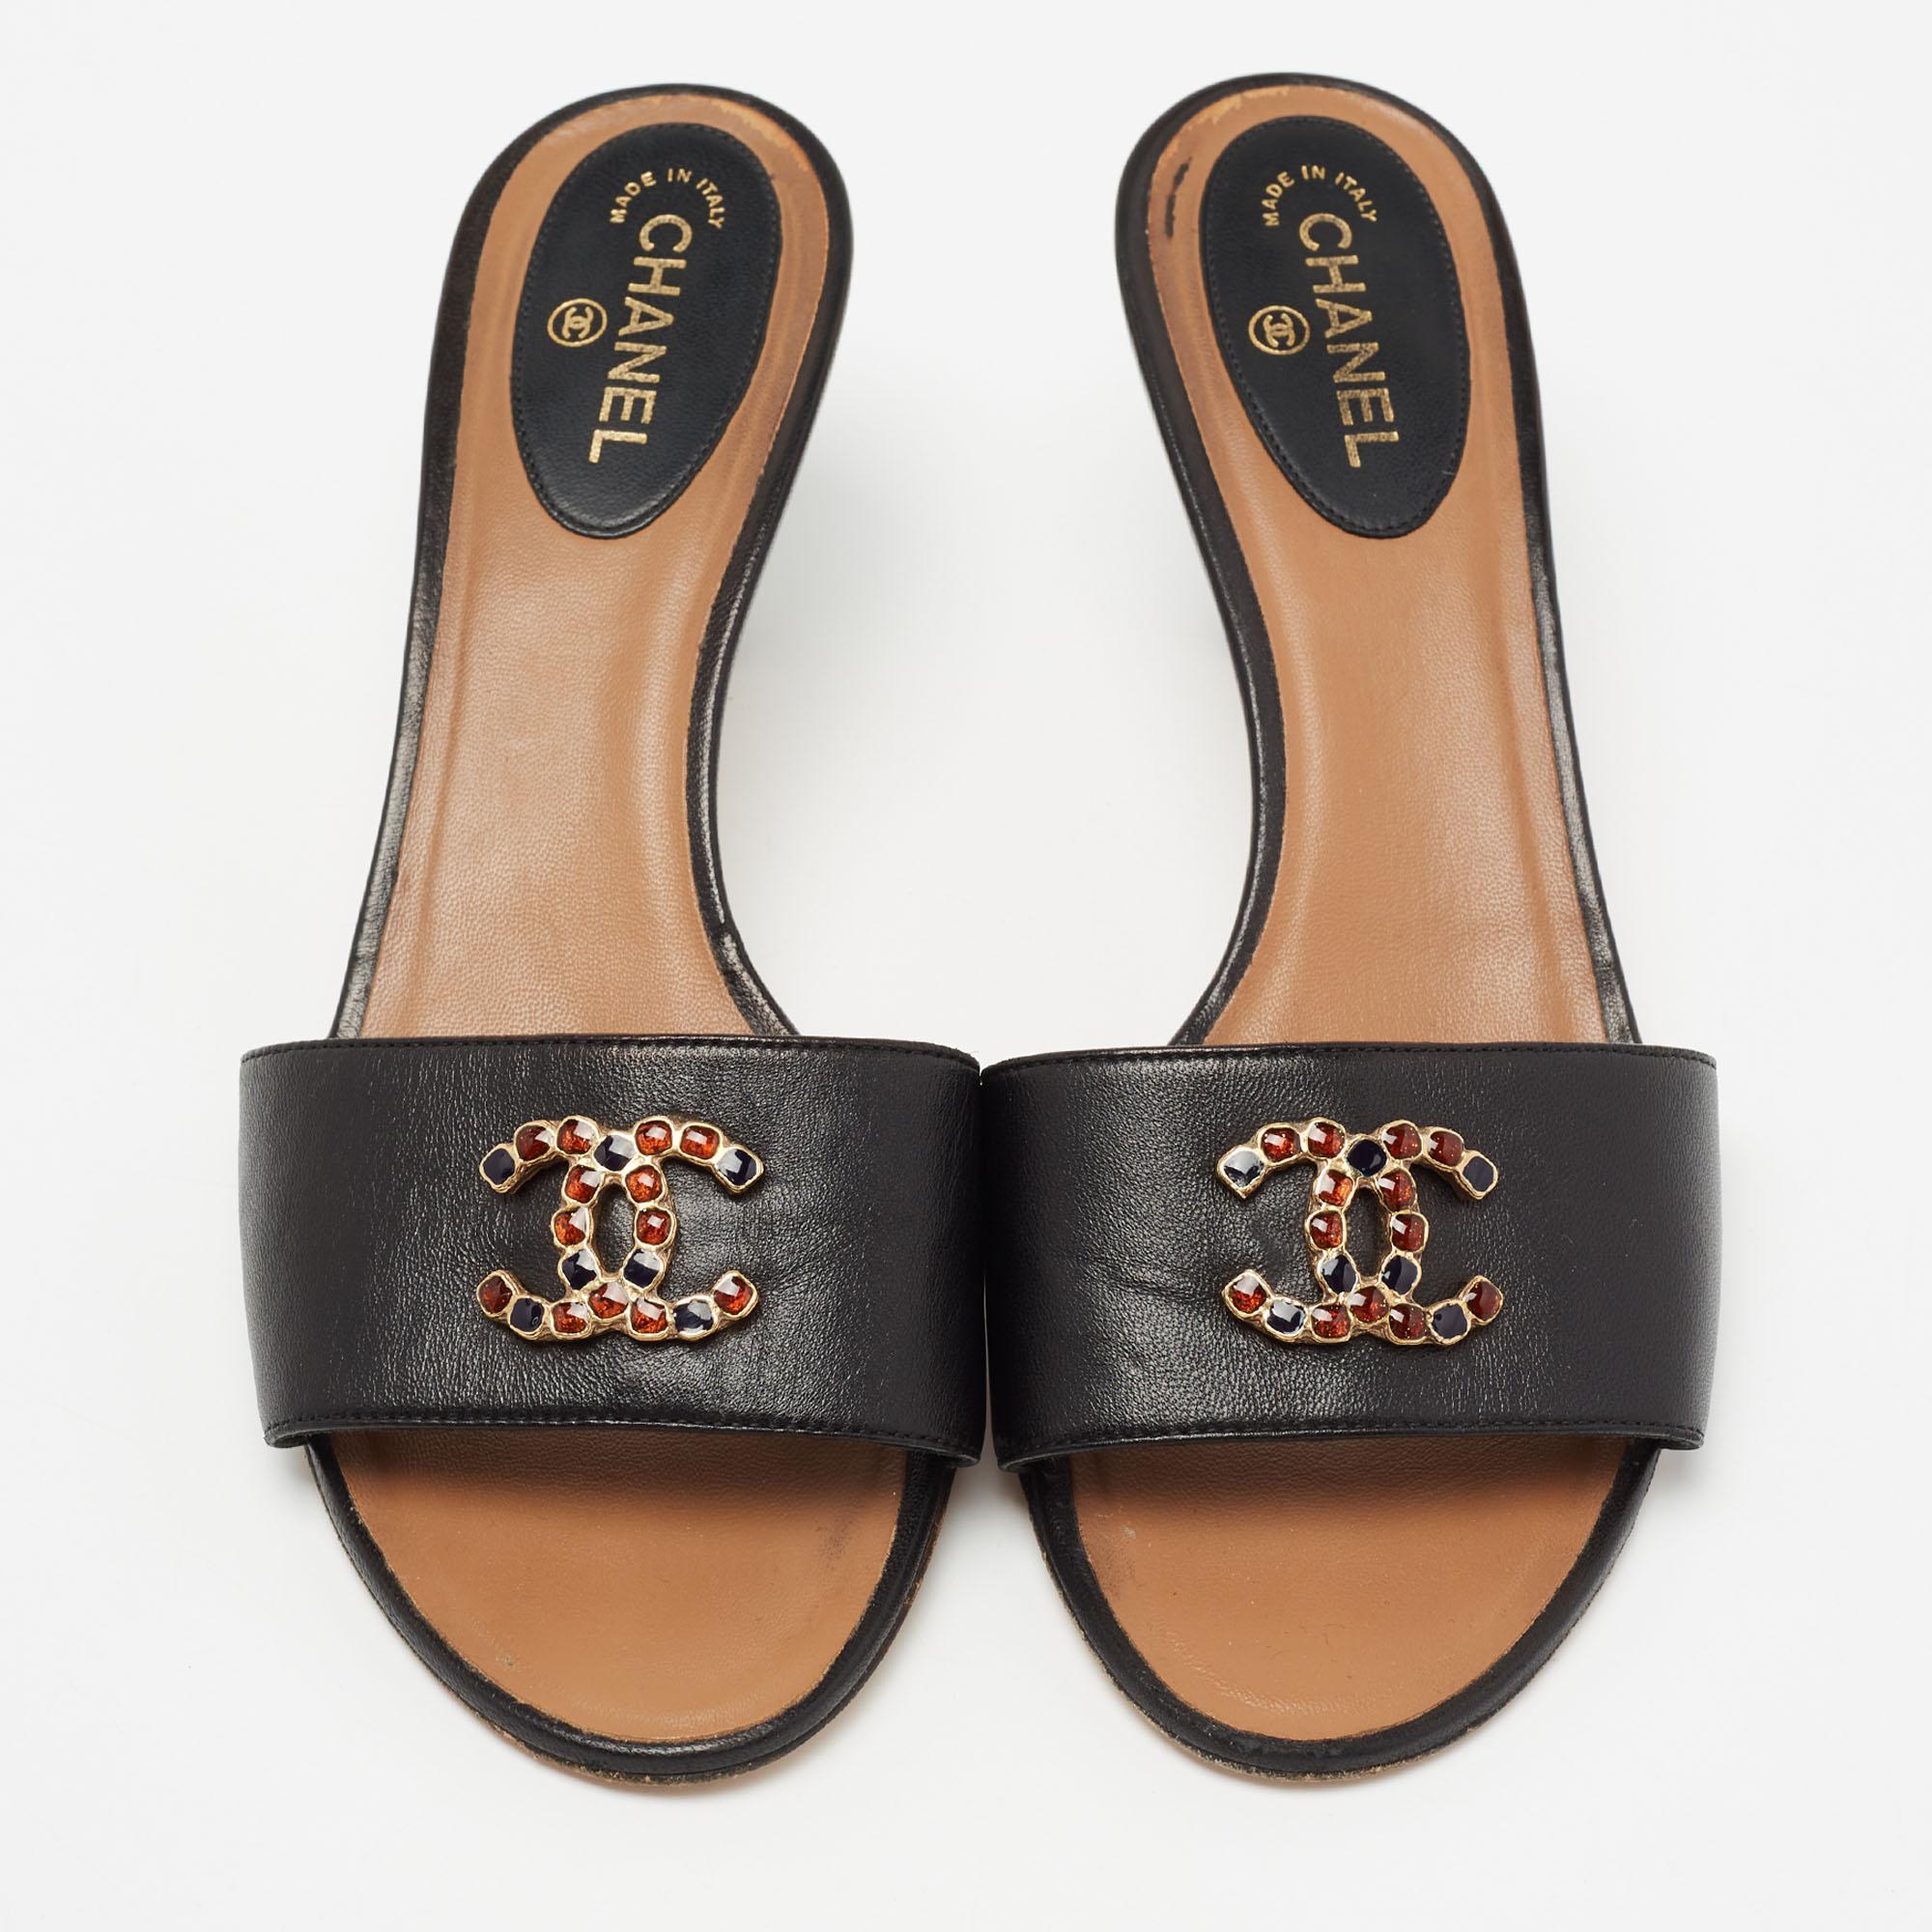 Chanel's timeless aesthetic and stellar craftsmanship in shoemaking is evident in these stunning slide sandals. They have been made using leather in a black hue, topped with the iconic CC logo, and elevated on low heels.

Includes: Original Dustbag

